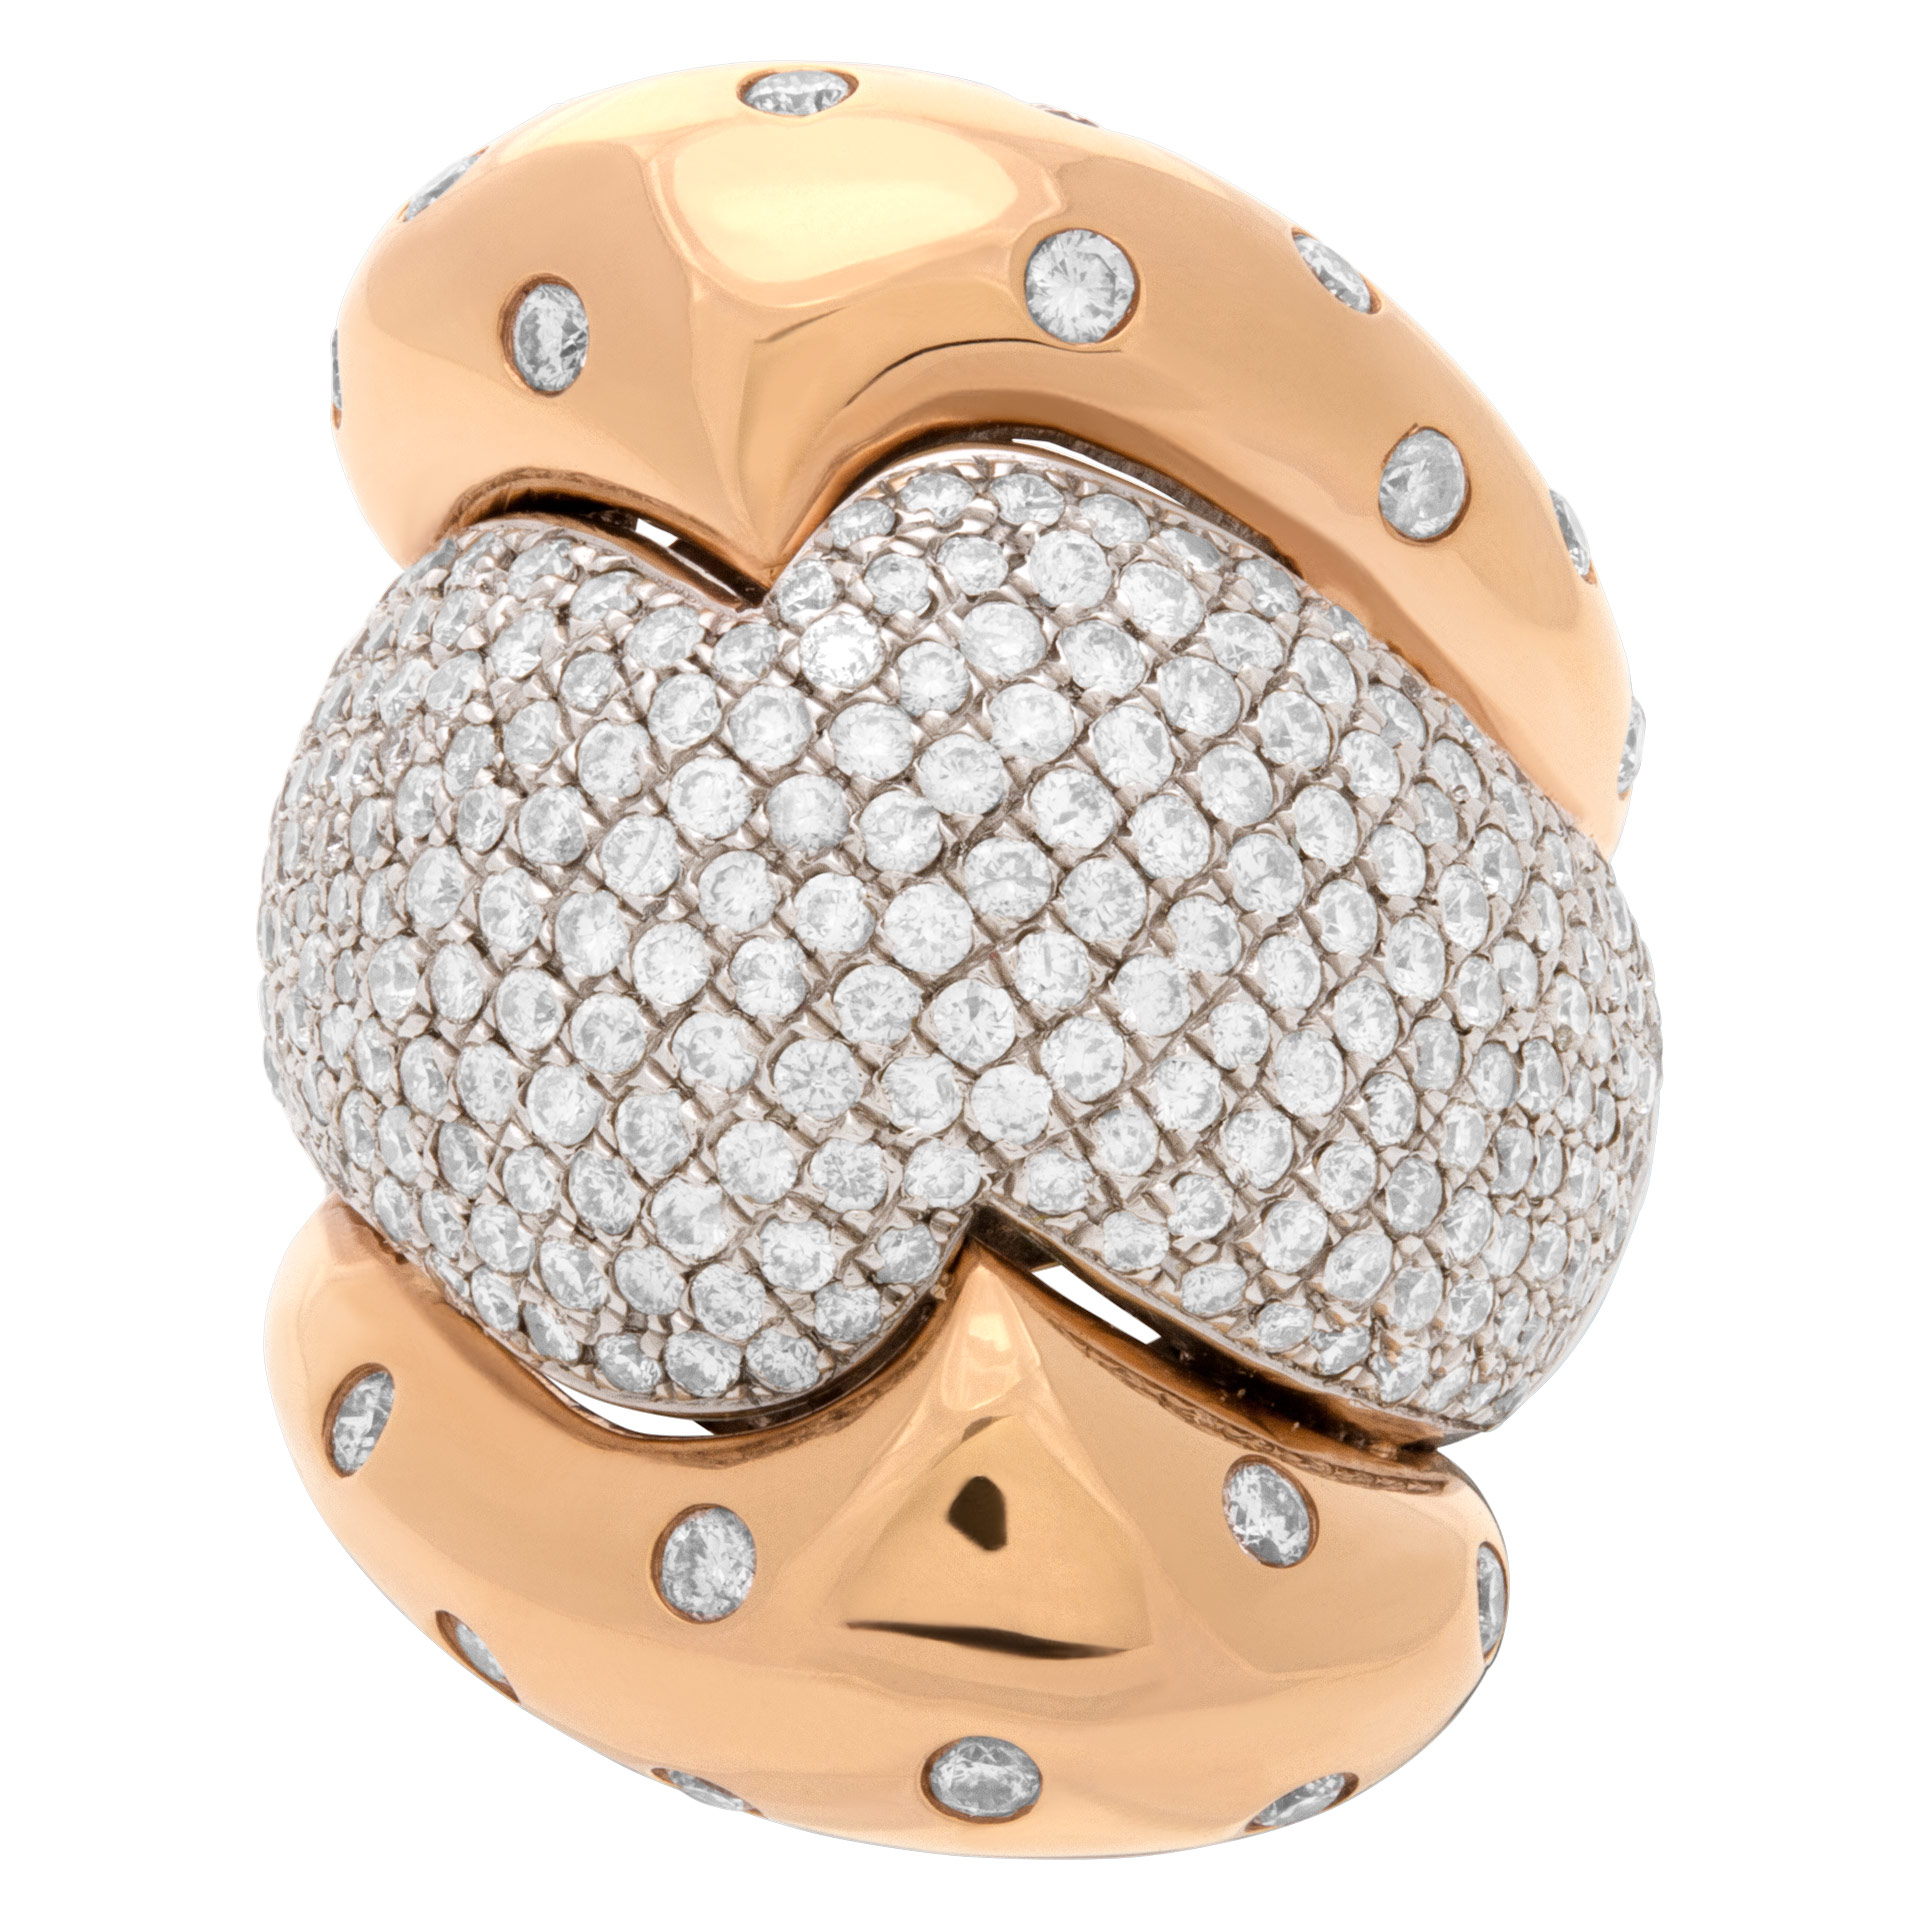 Puffed pave diamond ring in 18k white & yellow gold set with 3.04 carats. Size 7 image 1